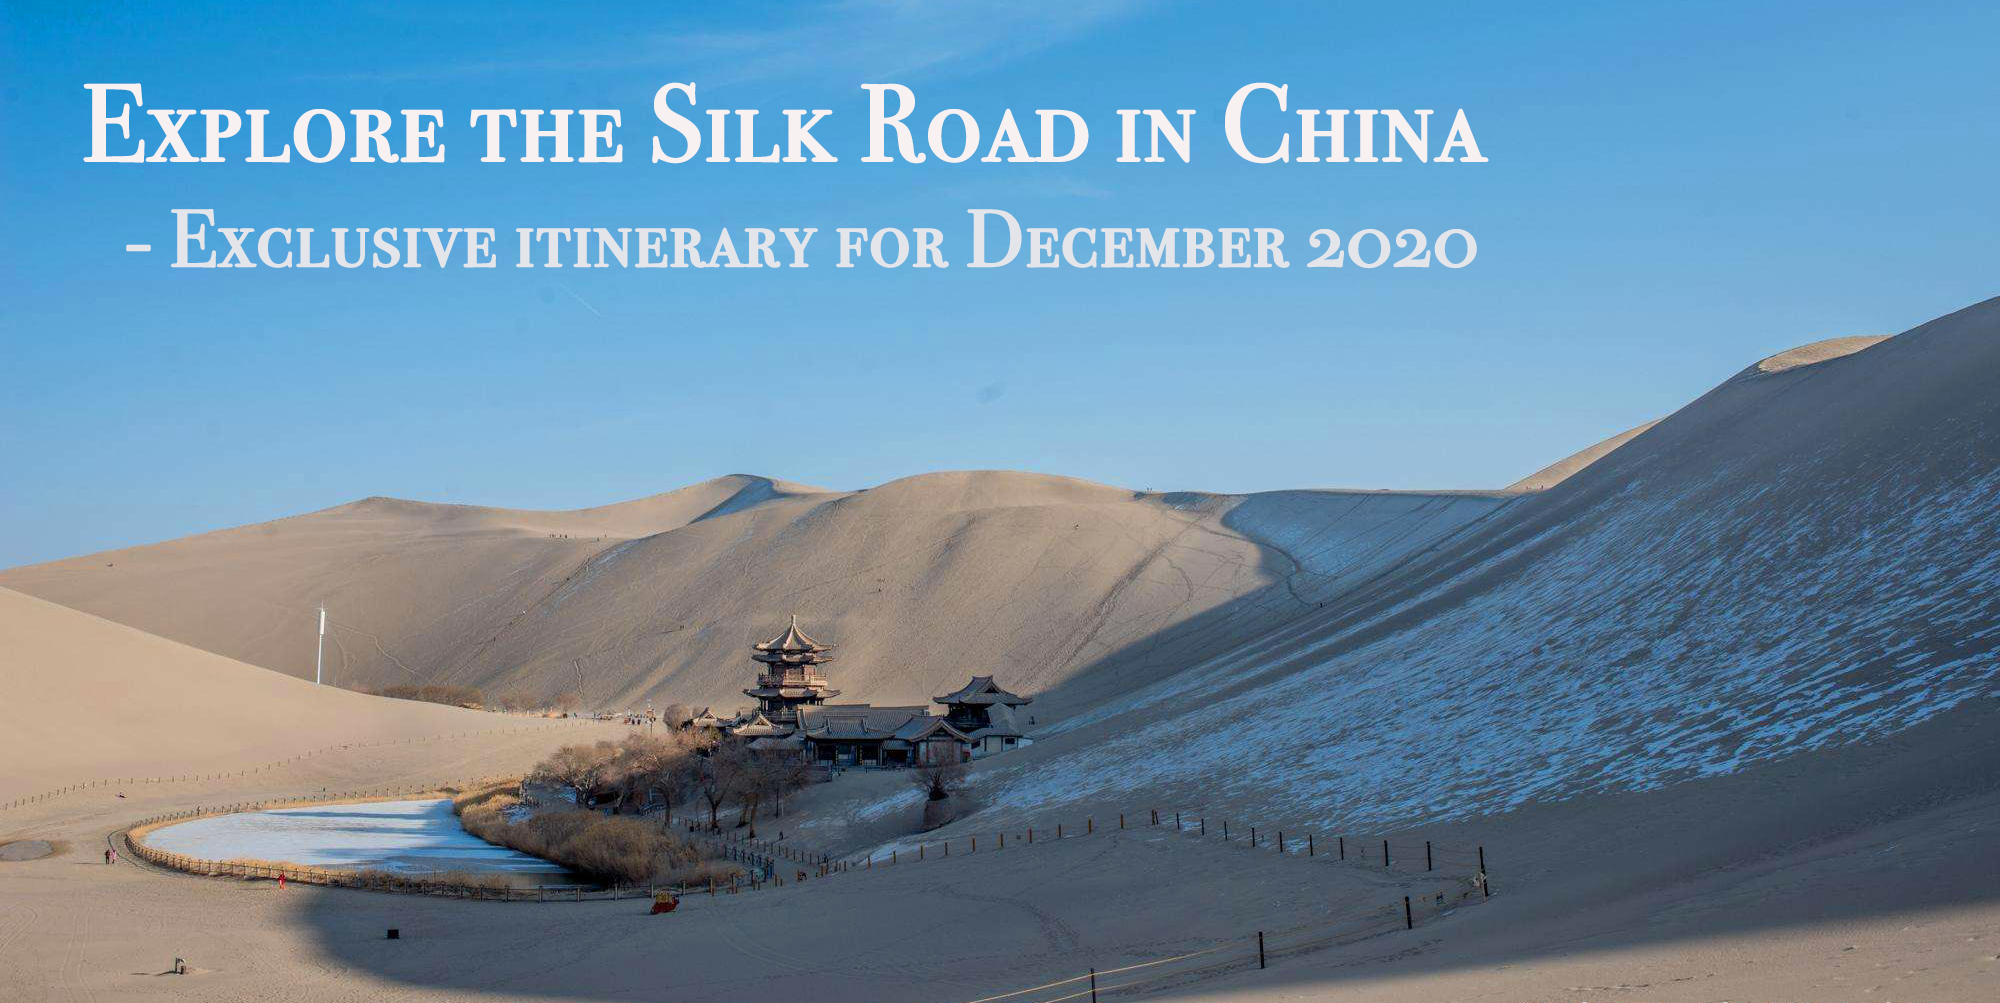 China's Empire of Money Is Reshaping Lives Across New Silk Road